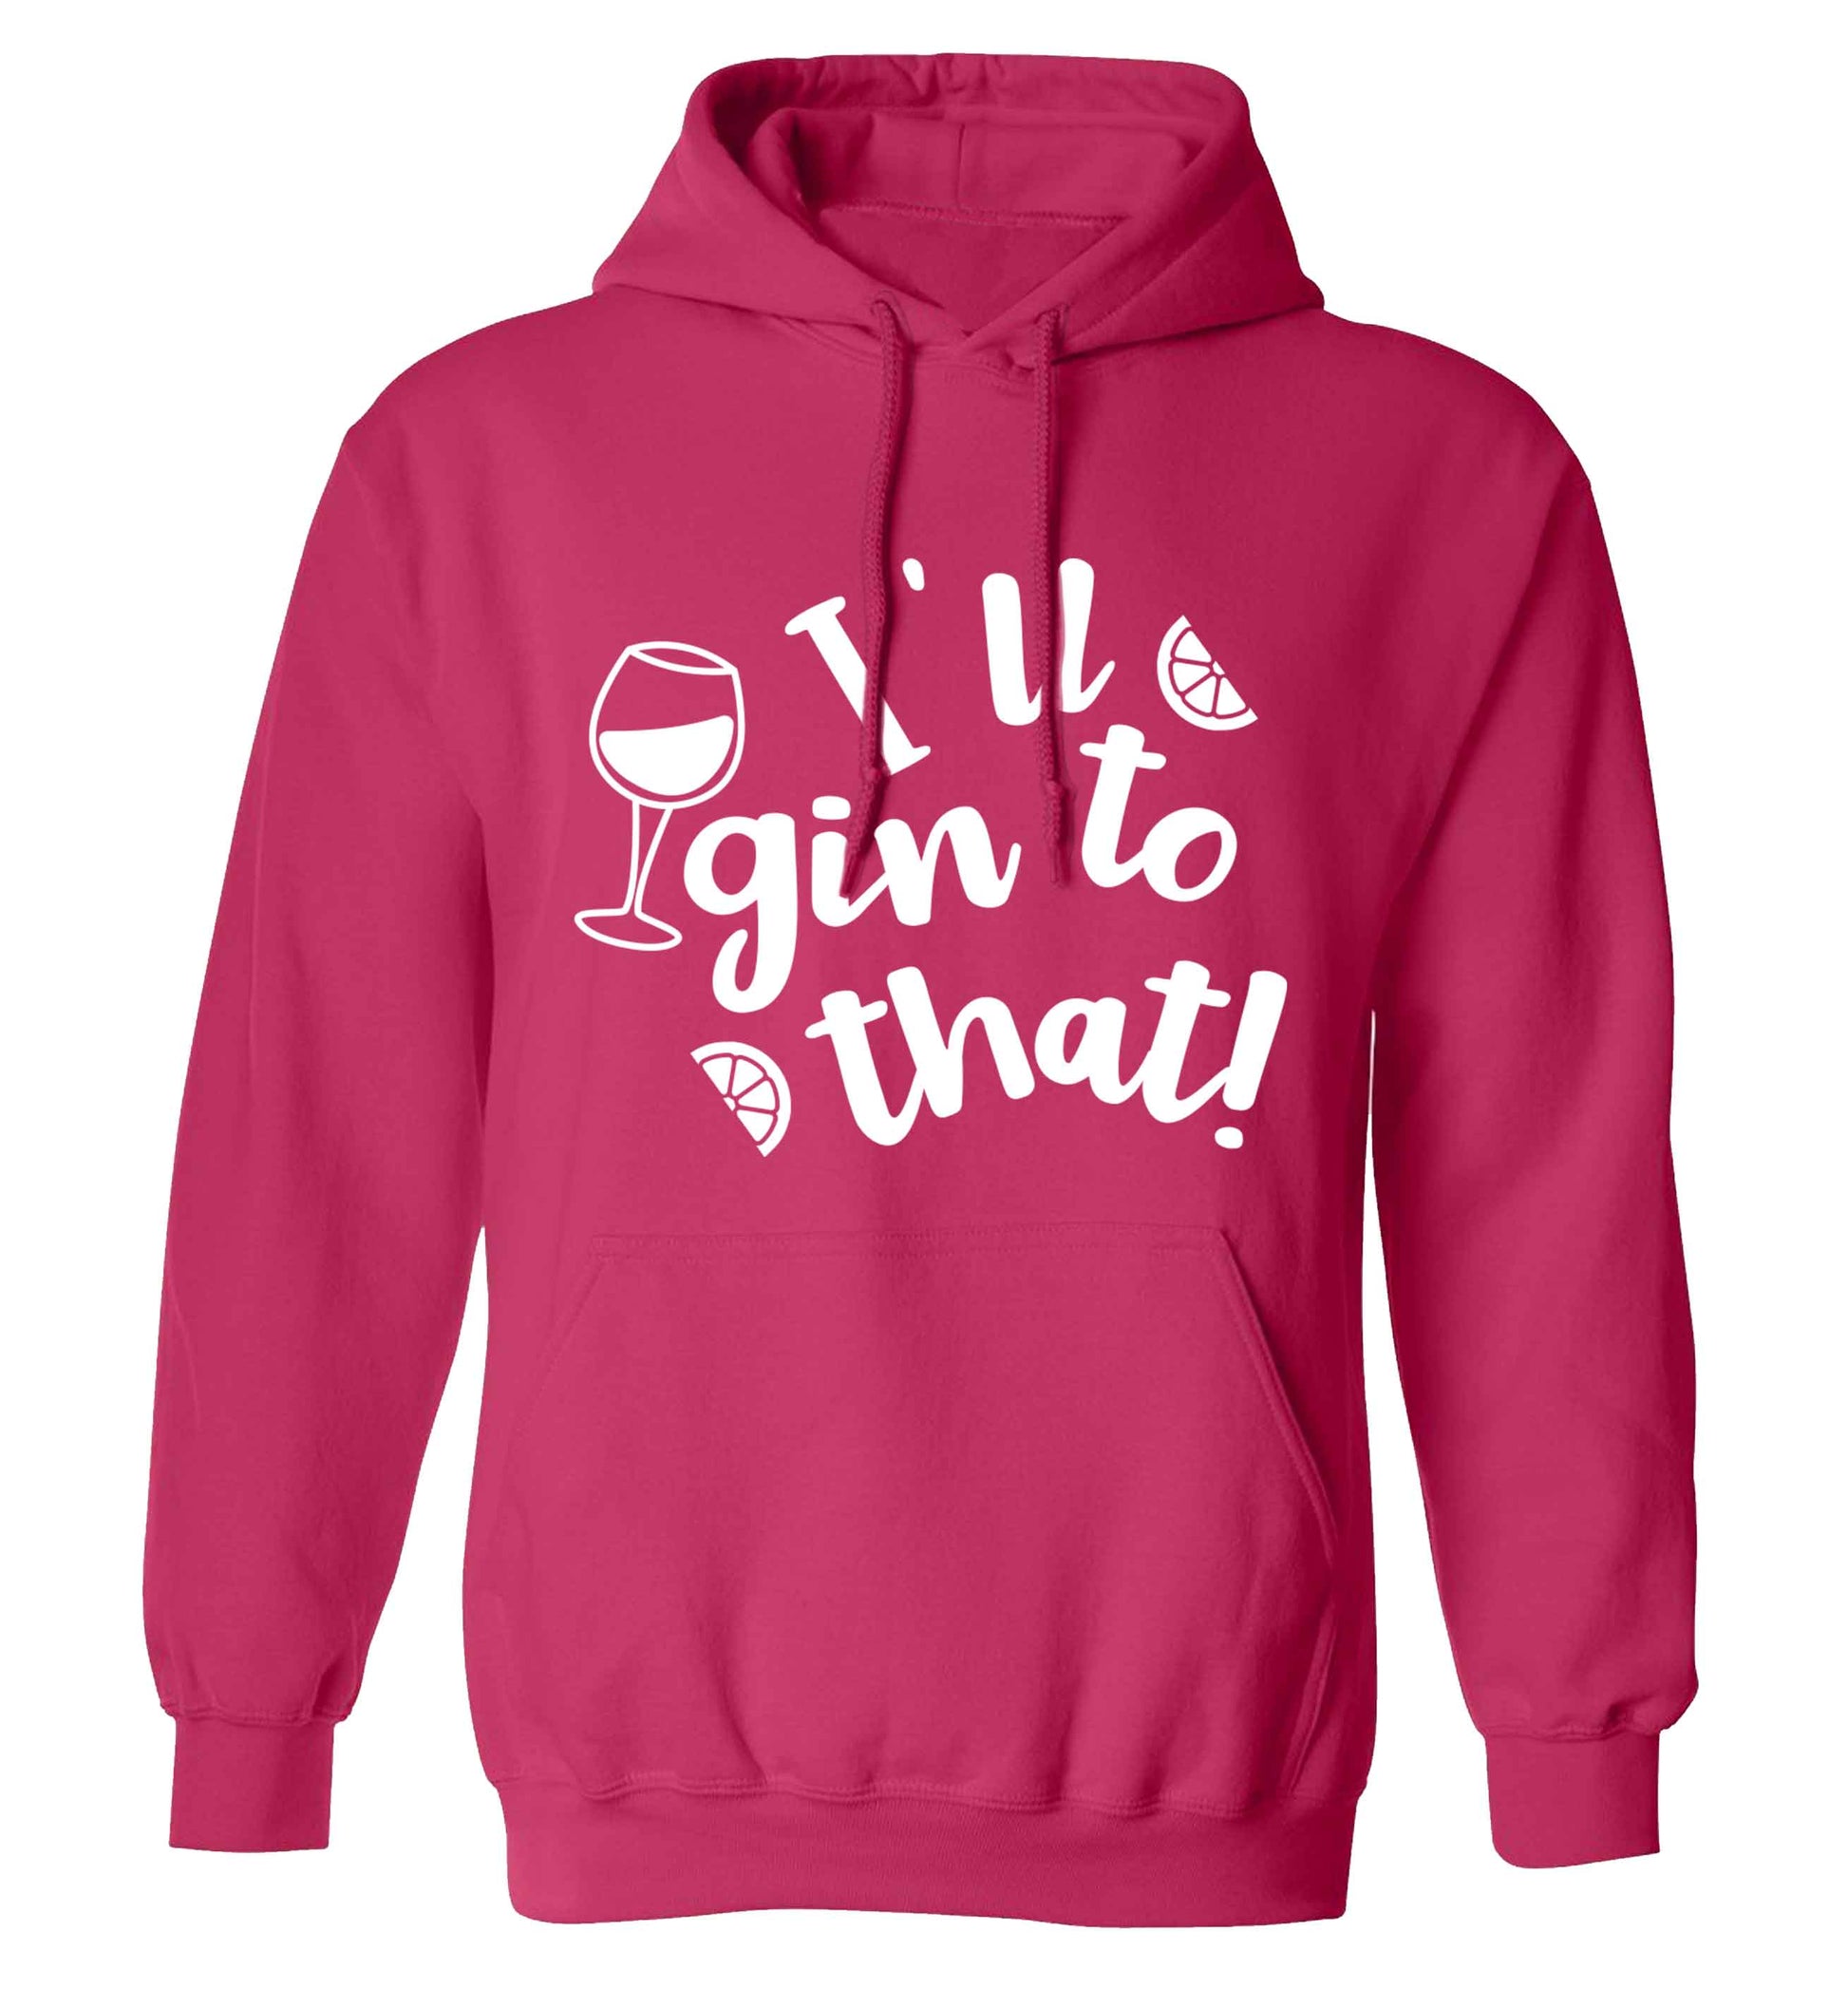 I'll gin to that! adults unisex pink hoodie 2XL